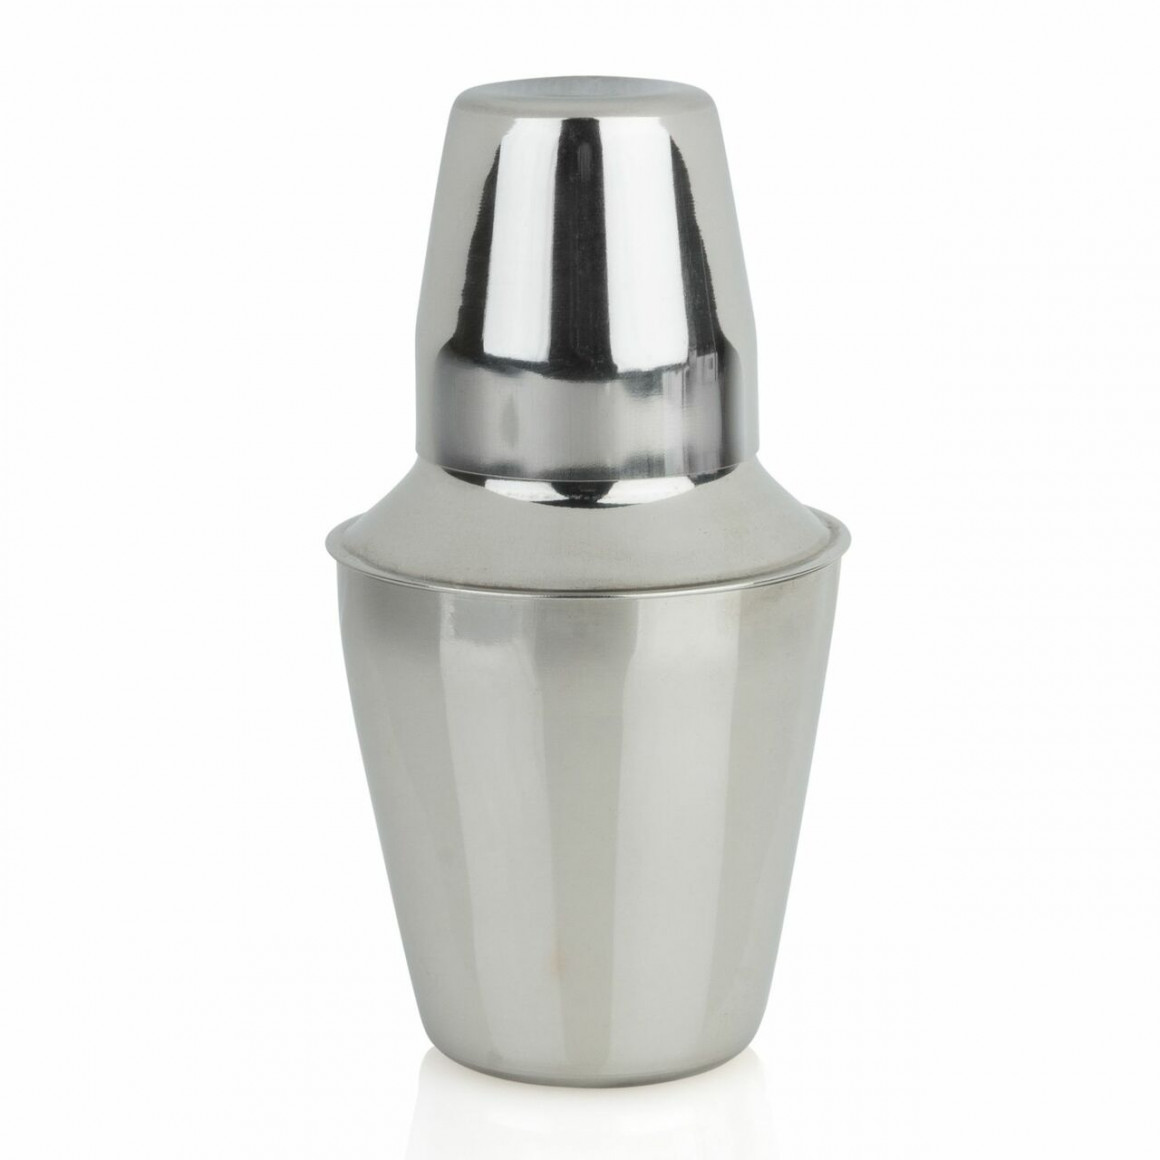 COCKTAIL SHAKER, STAINLESS STEEL, THREE-PIECE, 16 OZ.